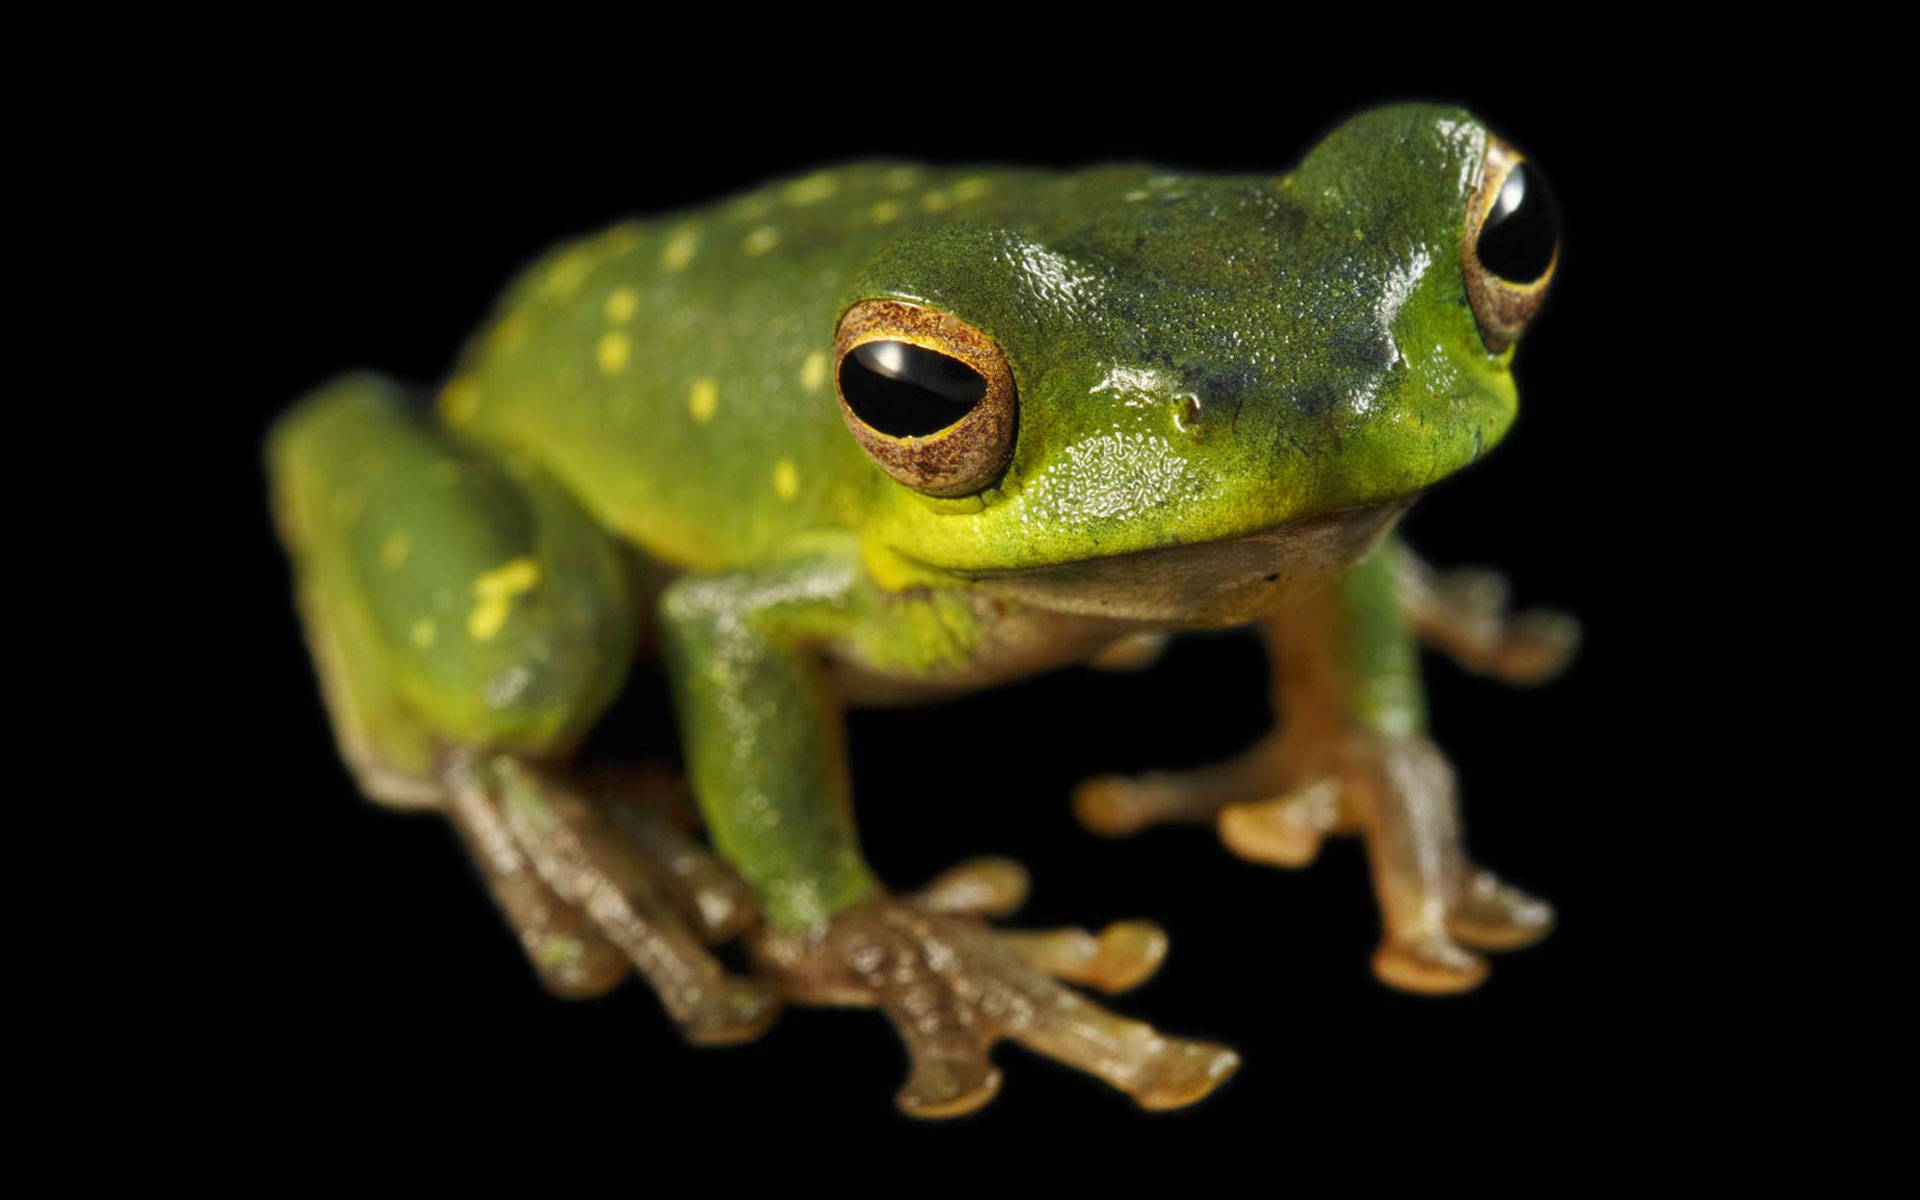 Cute Frog With Shiny Green Skin